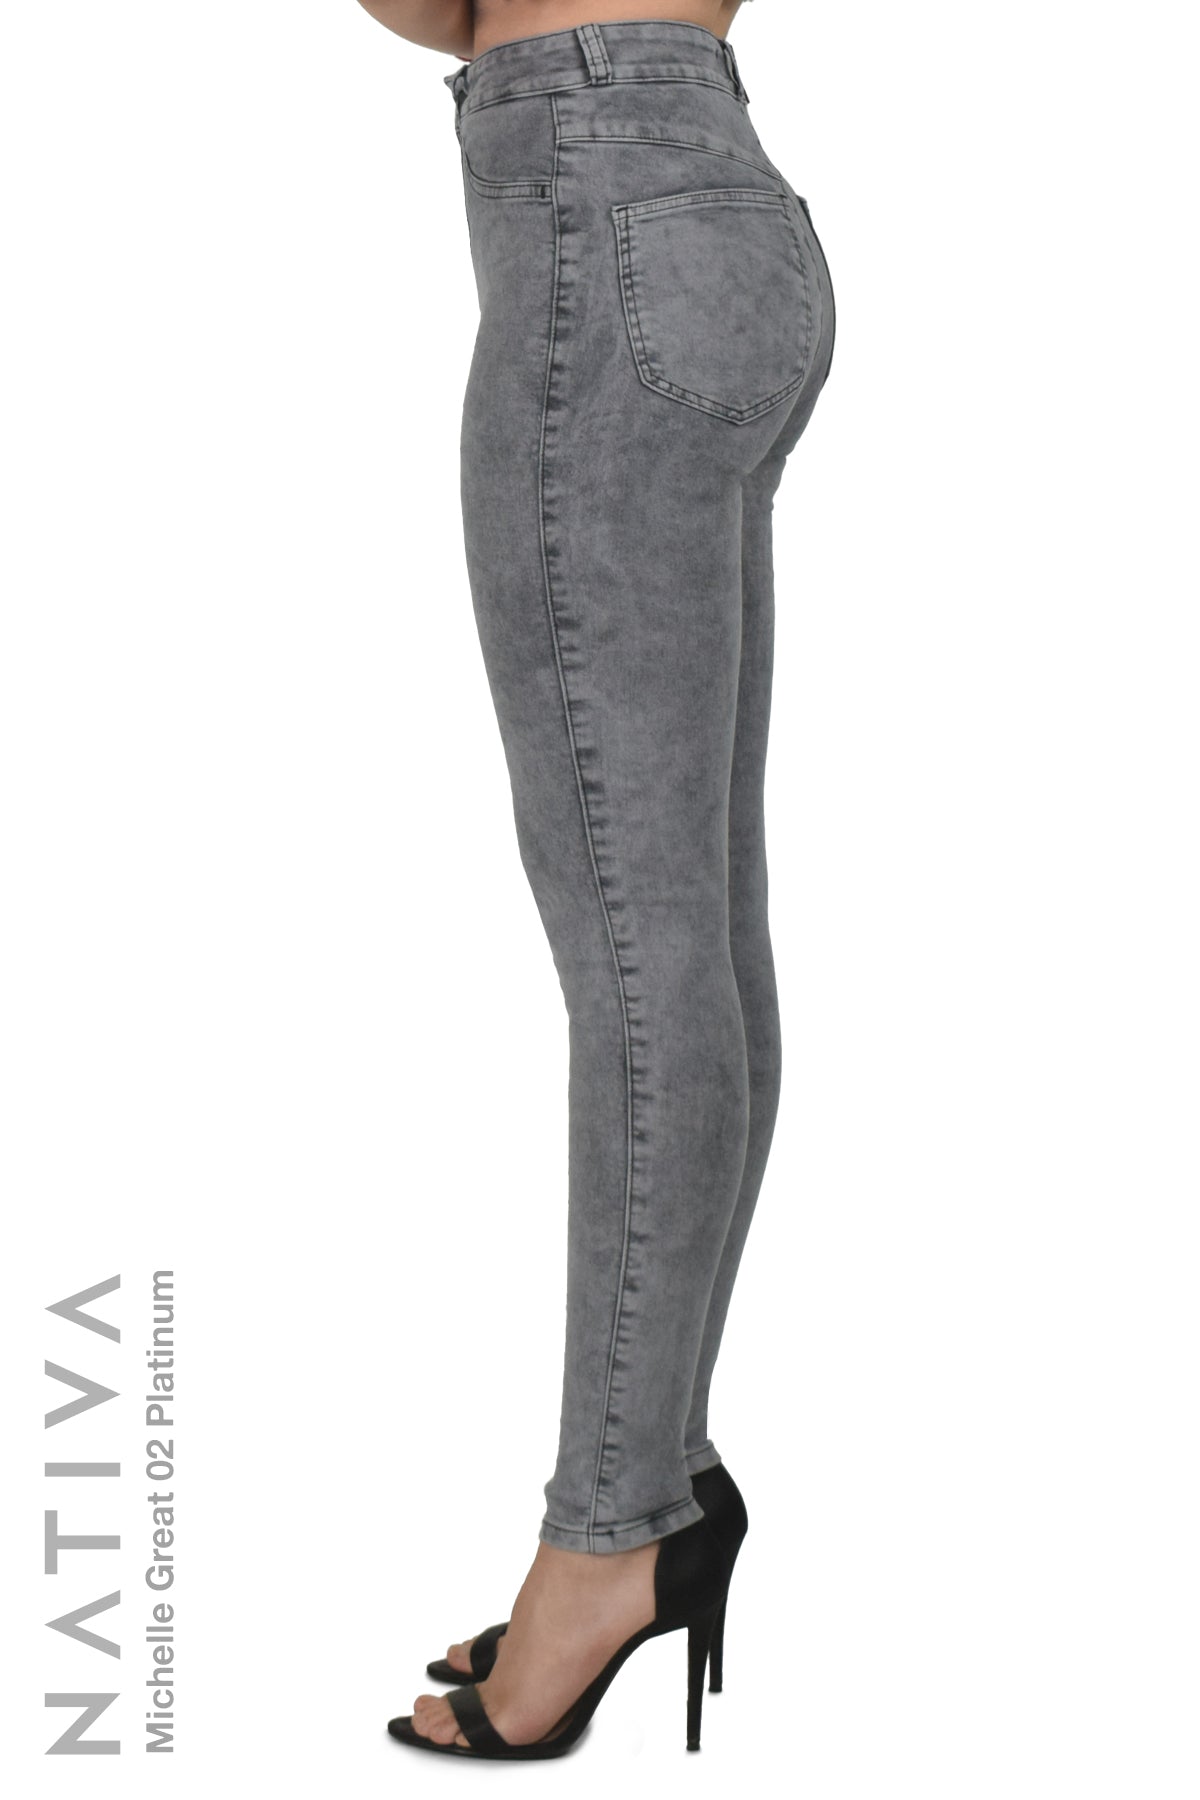 NATIVA, STRETCH JEANS. MICHELLE GREAT Capaci PLATINUM, Shaping High 02